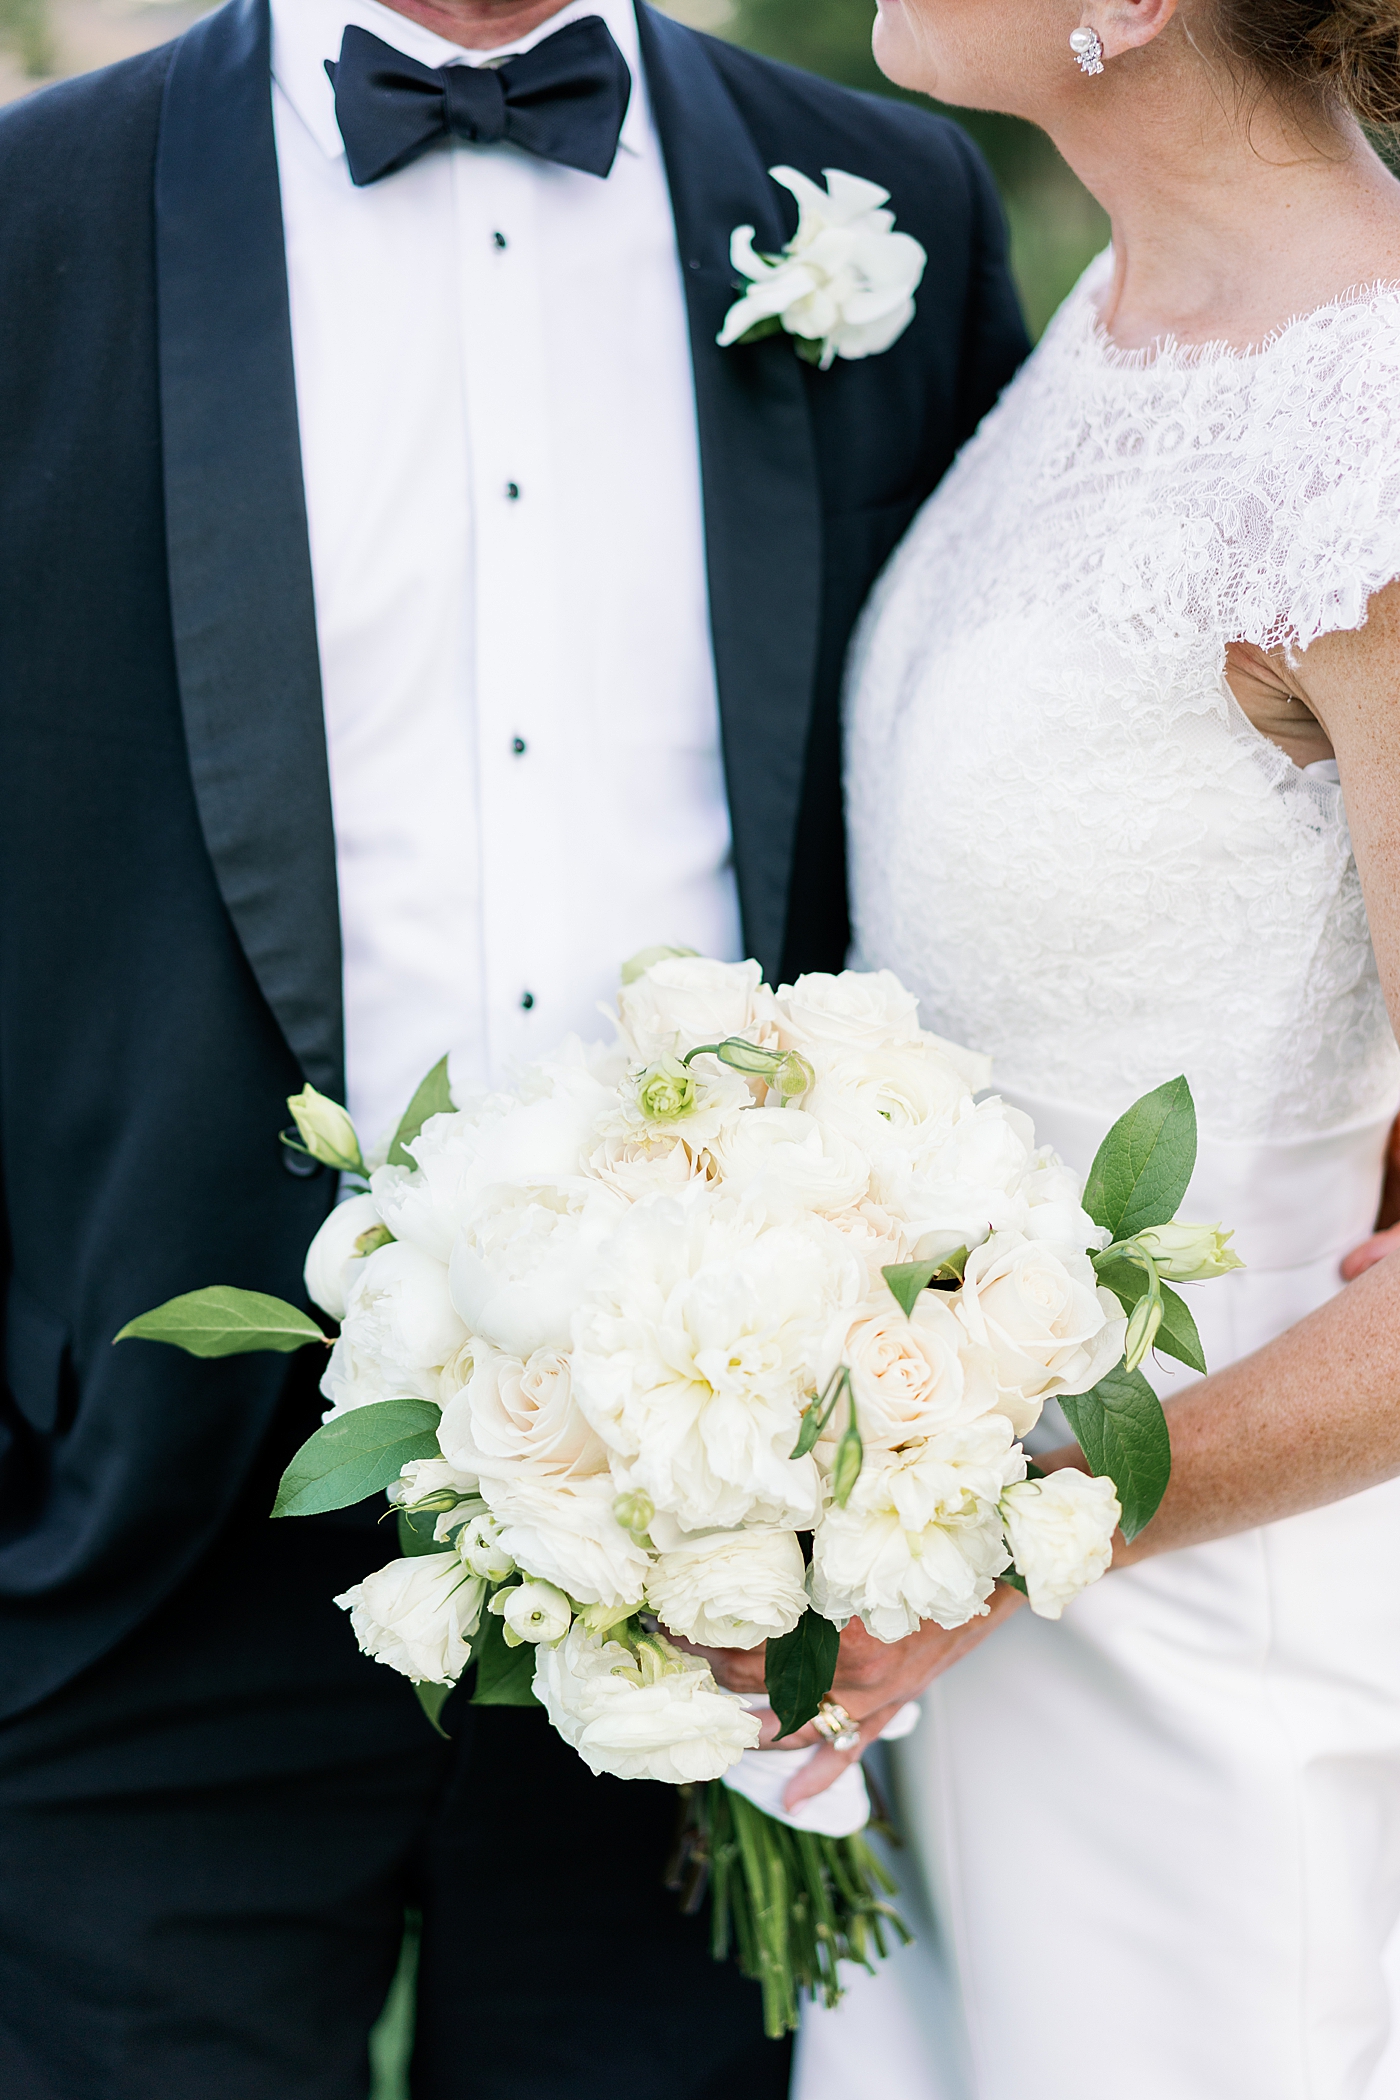 Bride holding bouquet of white flowers | Image by Annie Laura Photo